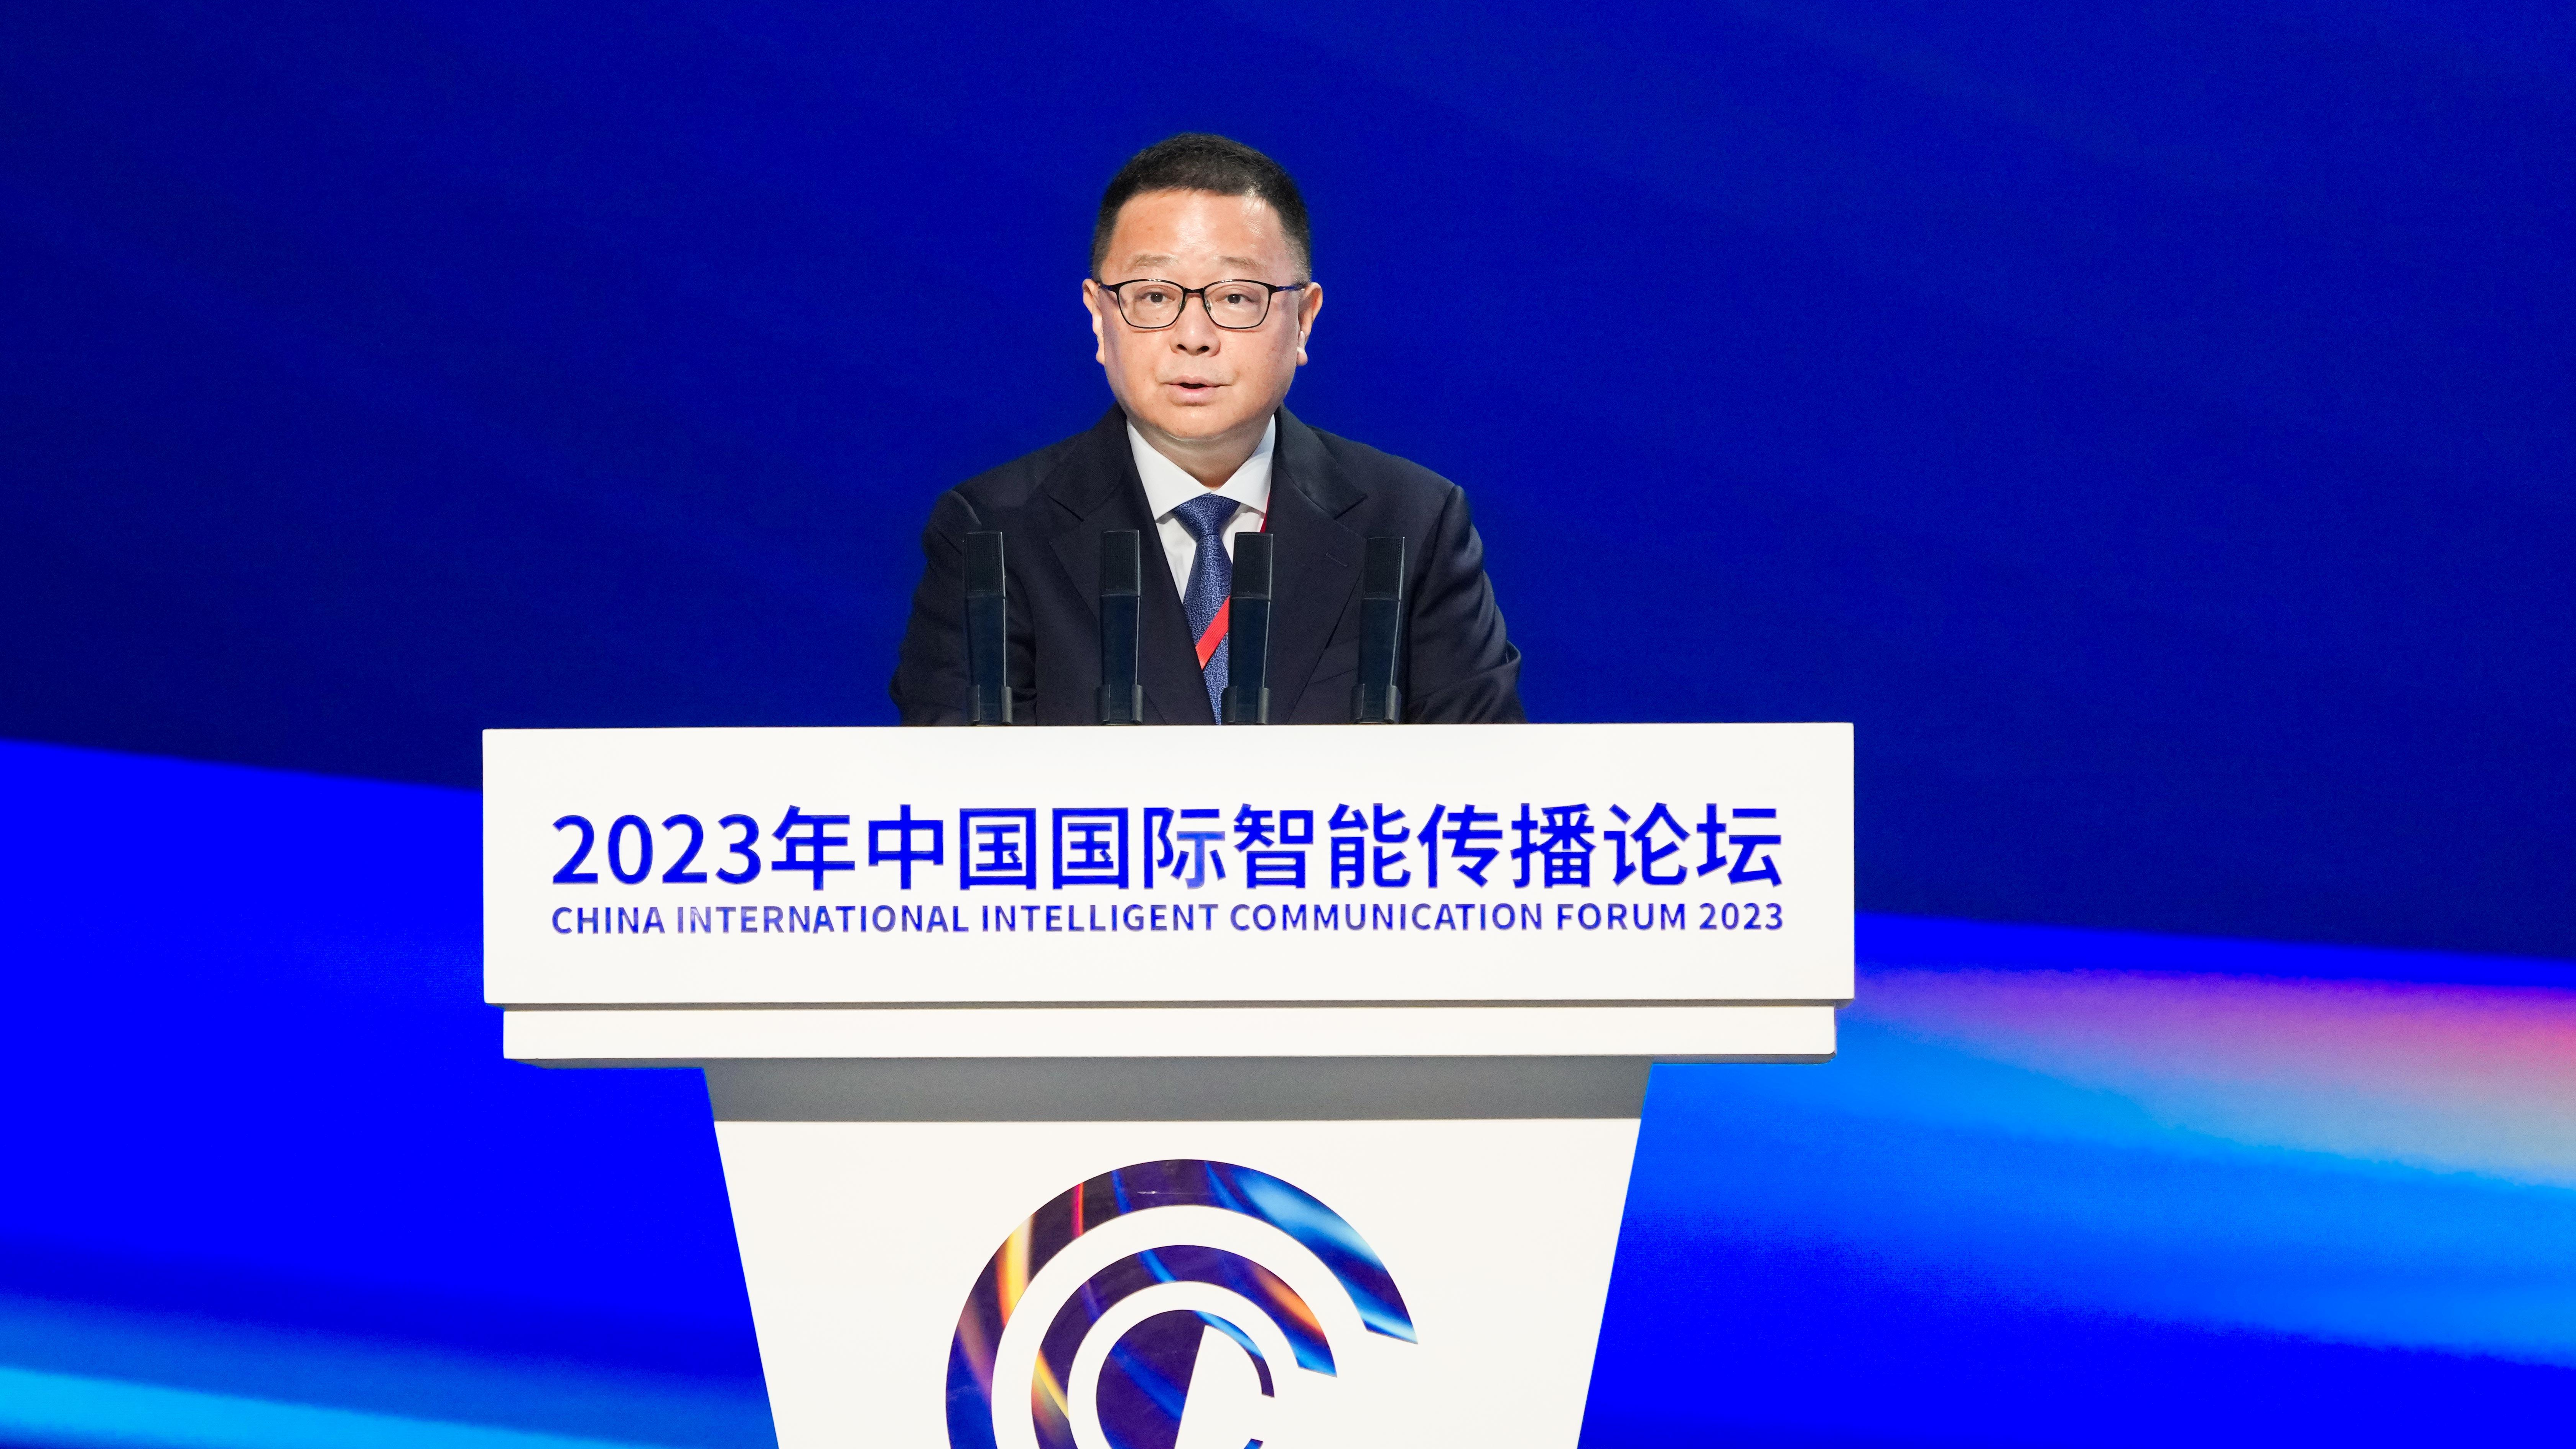 Hu Jinjun, vice president of CMG, delivers his speech at the forum. /CMG